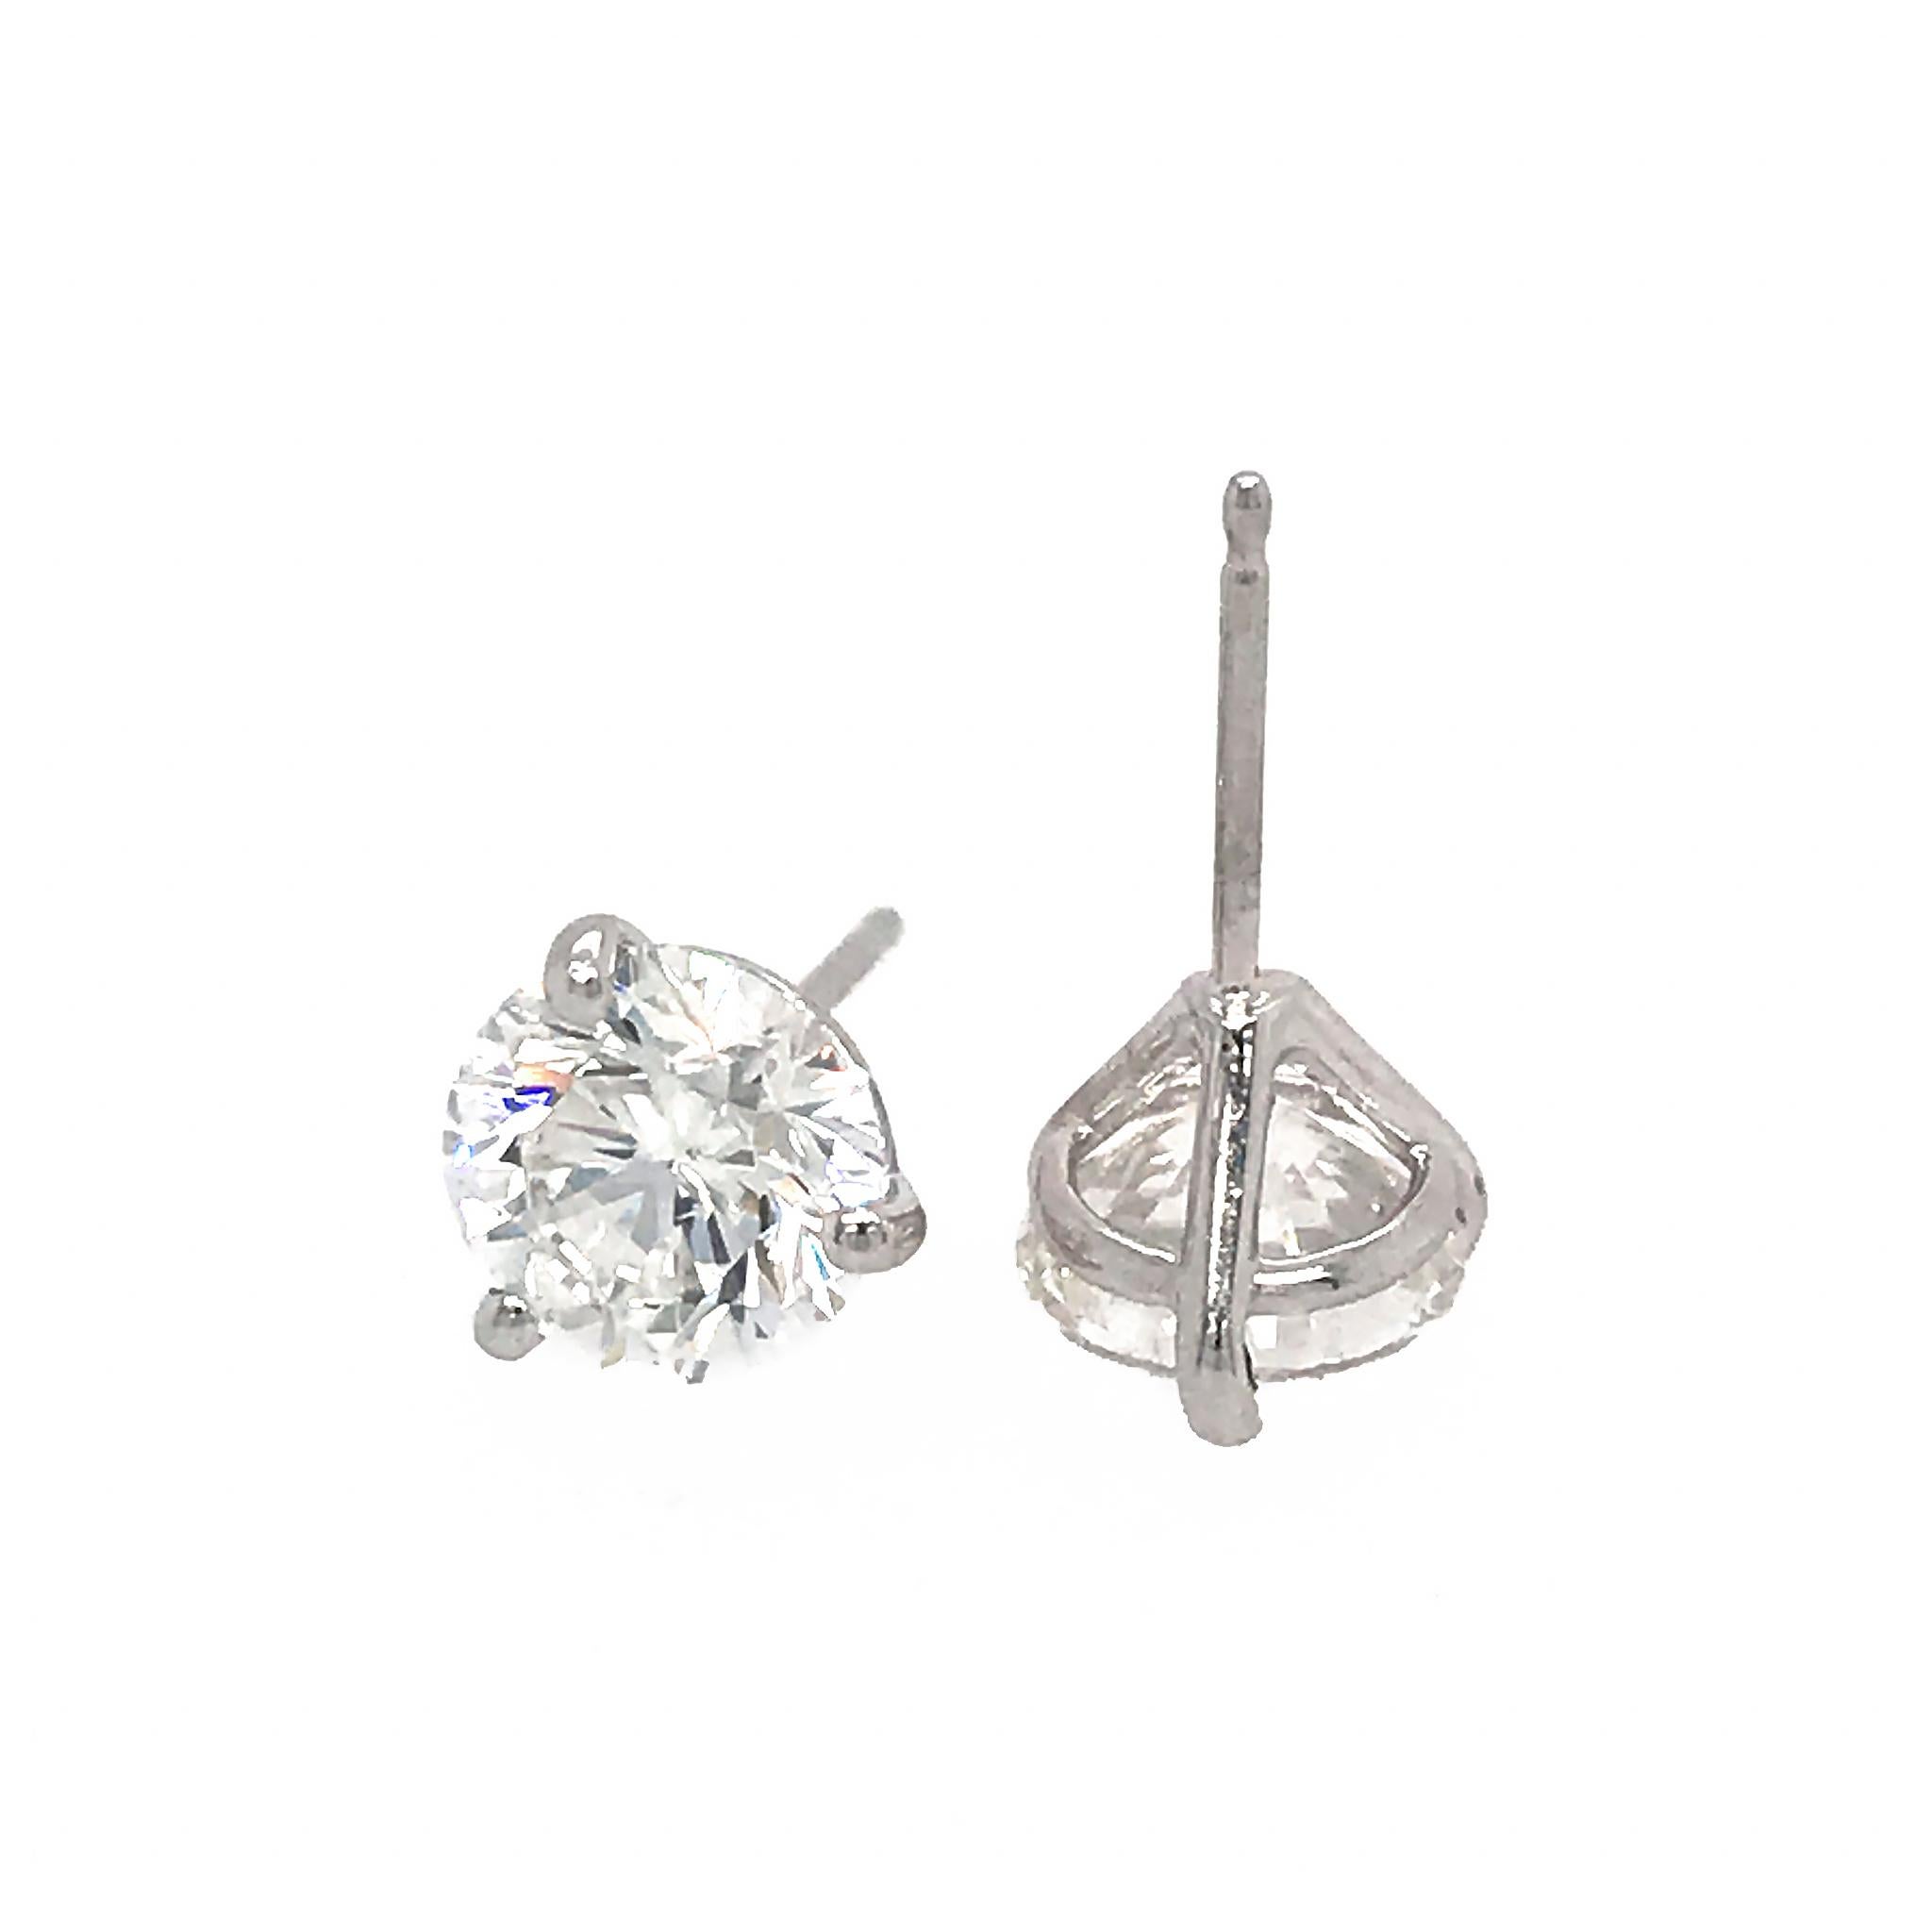 METAL TYPE: 14k White Gold
STONE WEIGHT: 3.02 ct twd
CLARITY: SI2
COLOR: G
GIA REPORT NUMBERS: 11585970 and 11809894